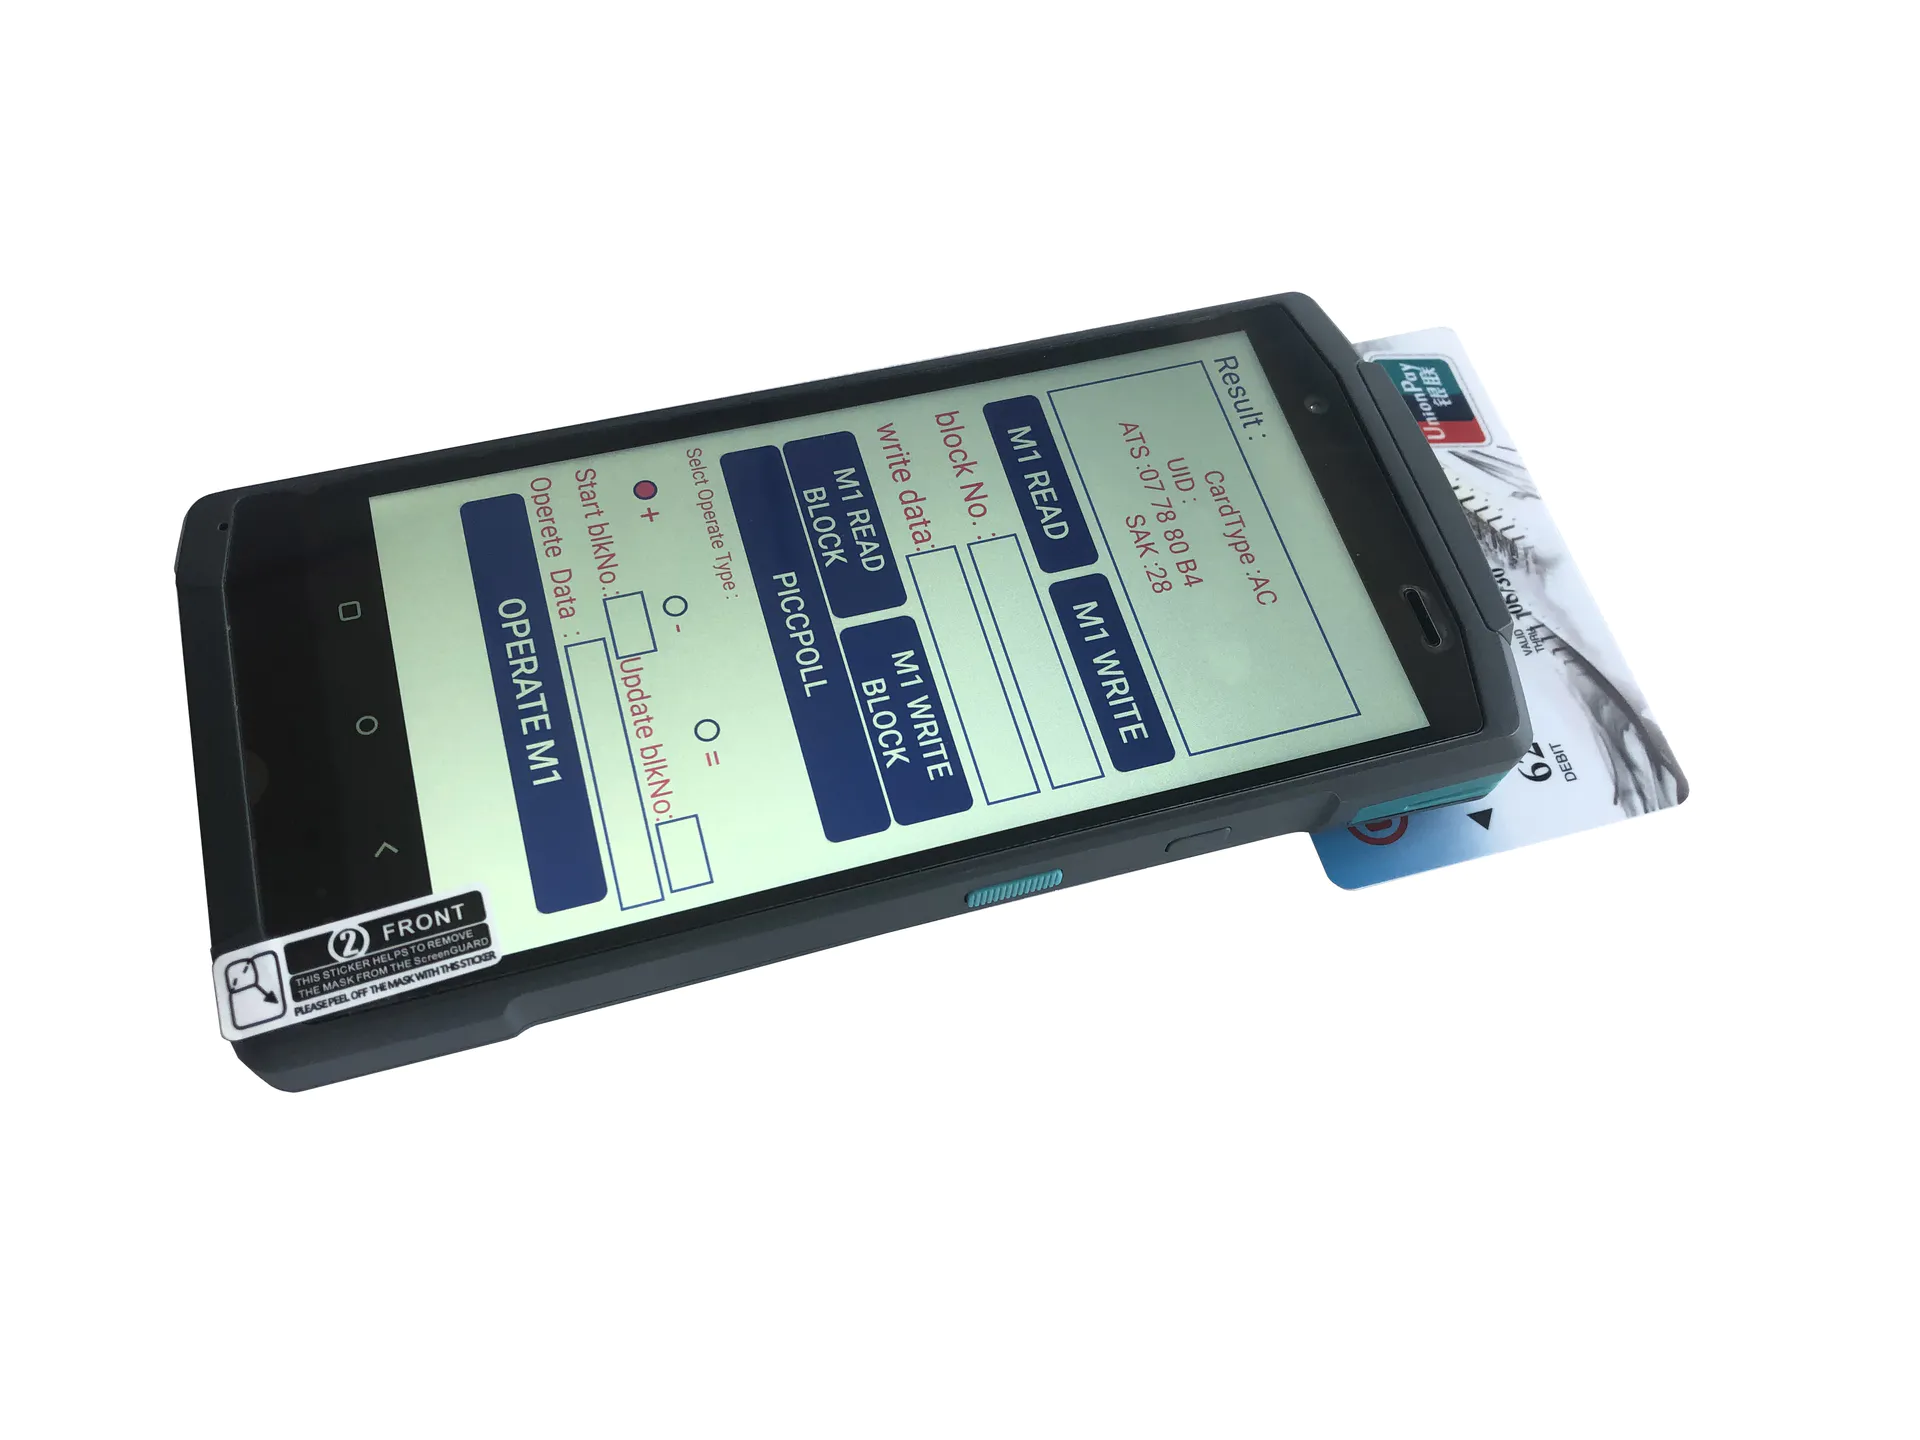 NFC Android Payment System Handheld POS Terminal With Card Reader